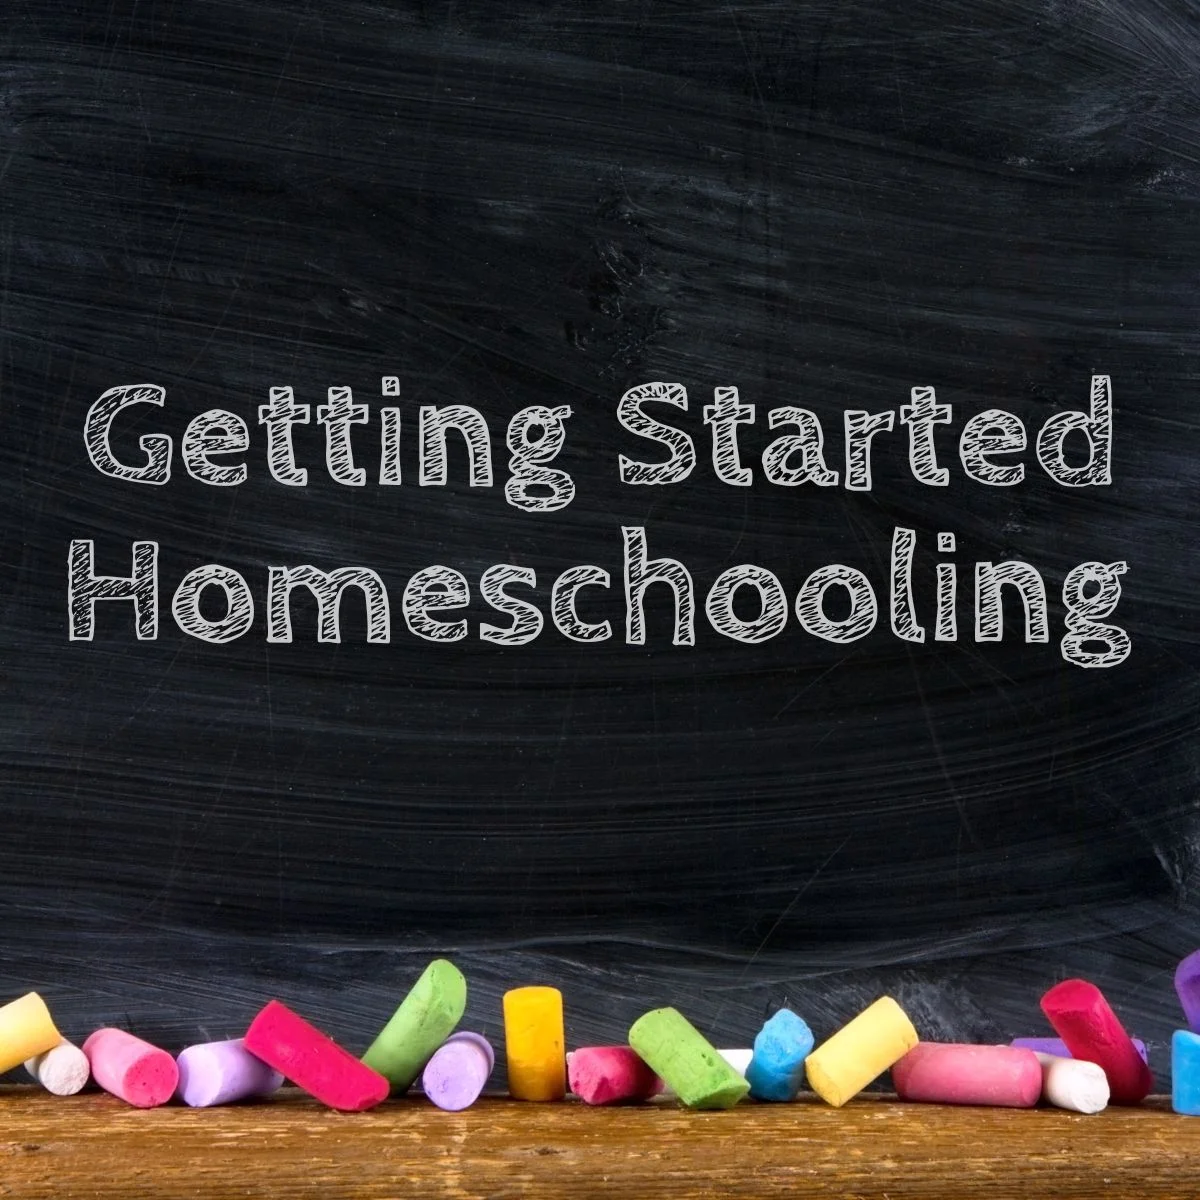 How To Homeschool Your Child